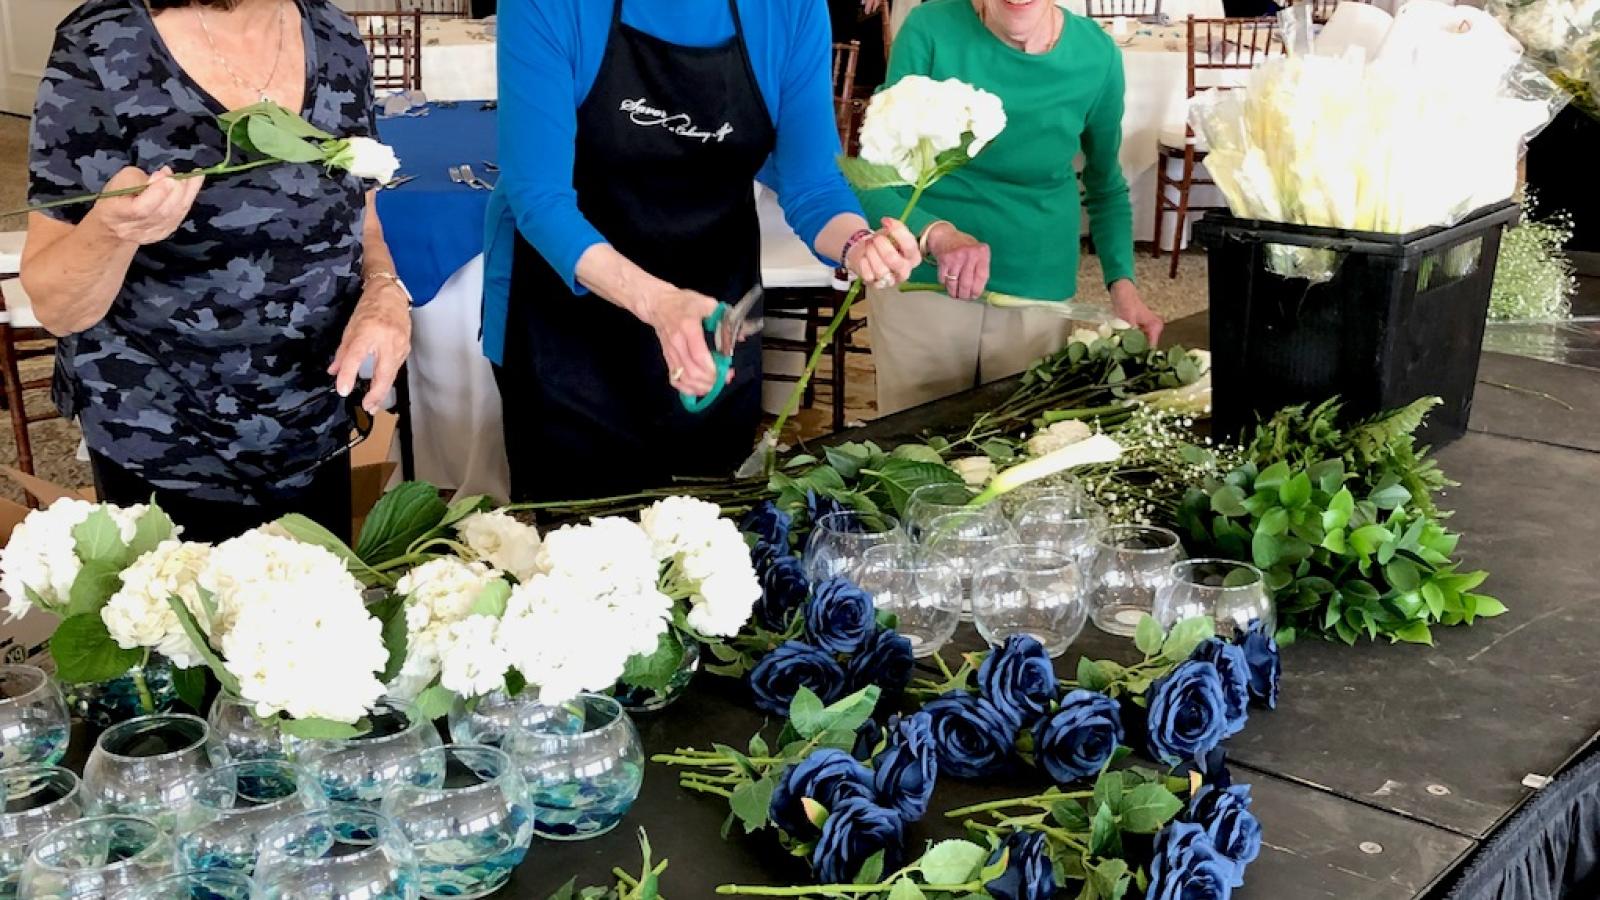 Foundation Auxiliary Members prep flower arrangements for an event